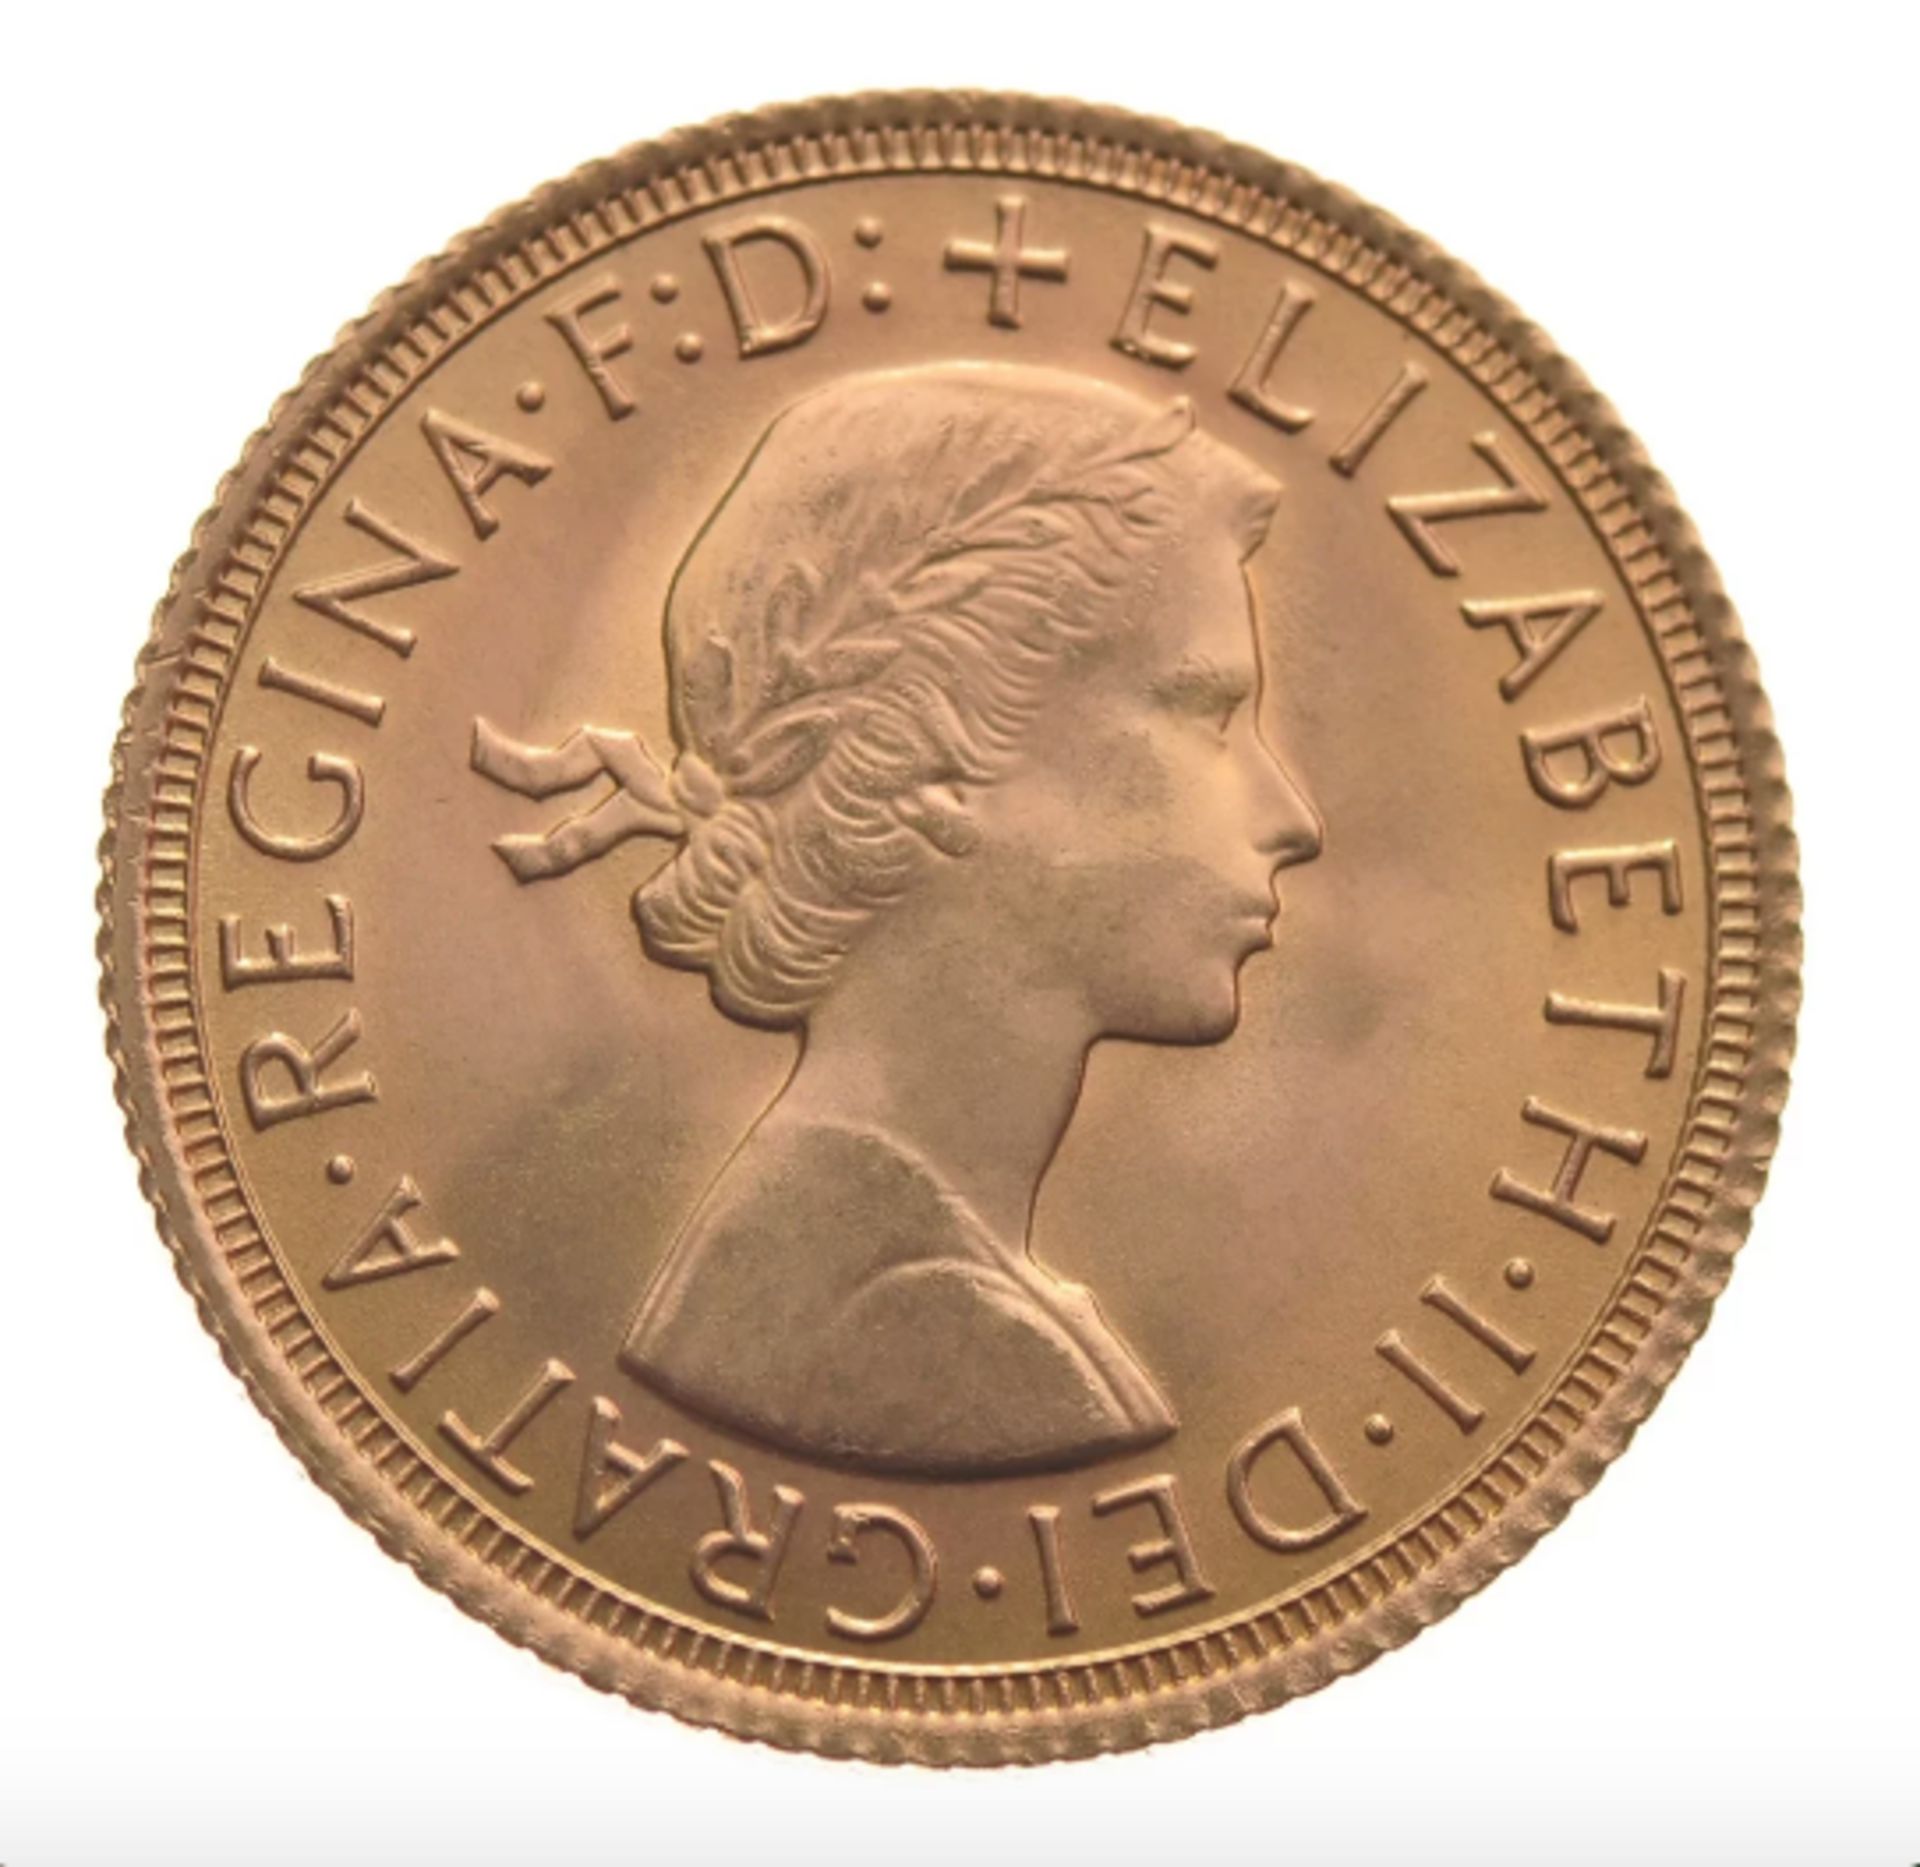 1964 - Full Gold Sovereign - Elizebeth Young Head - London - Image 2 of 2